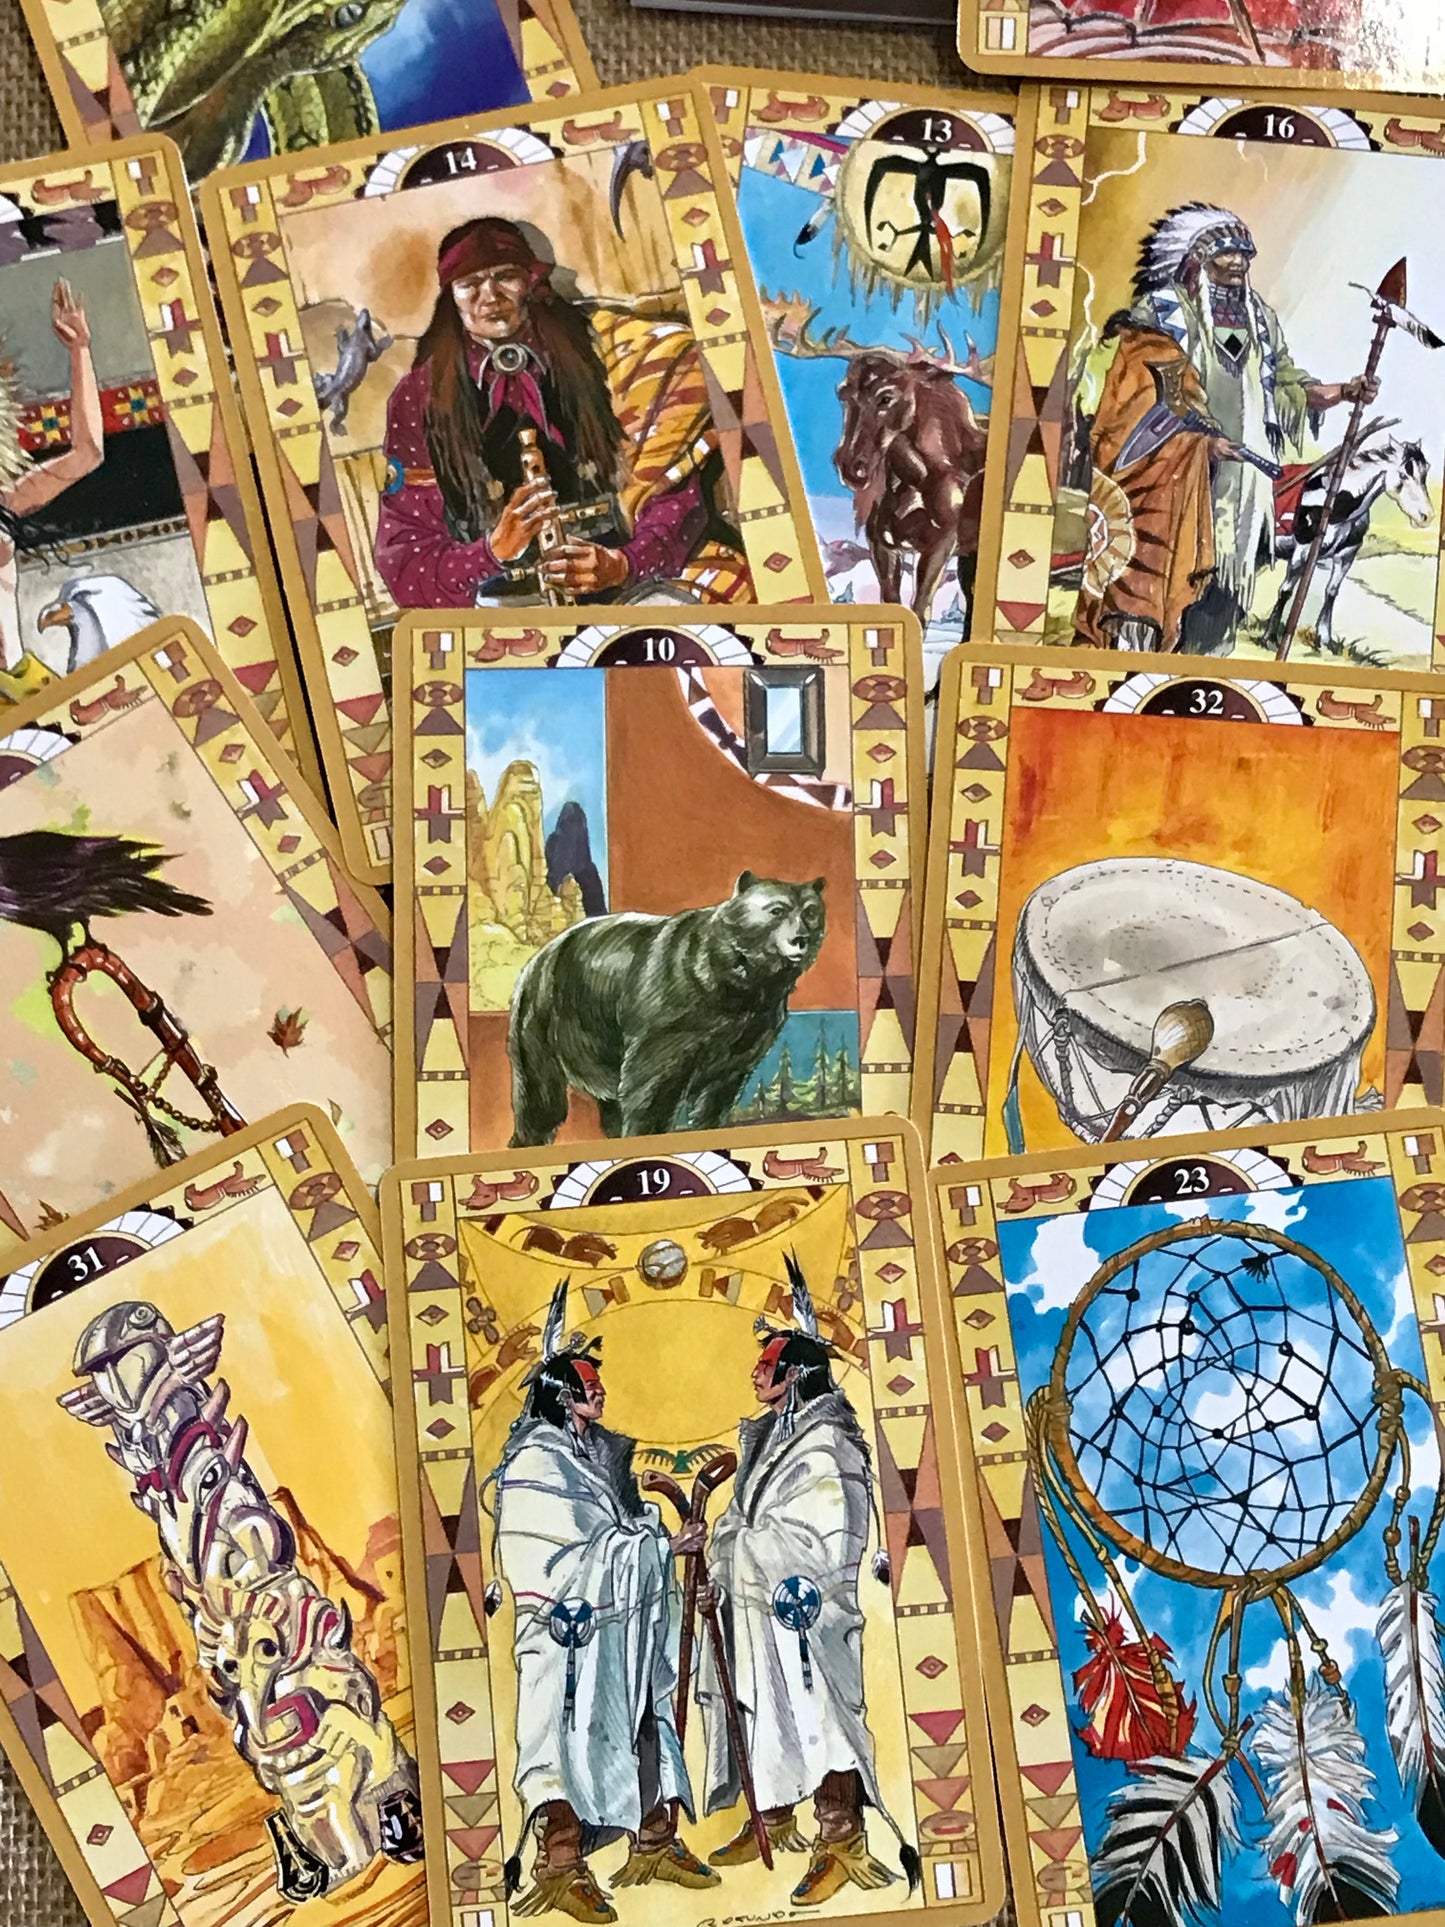 Native American Oracle Cards